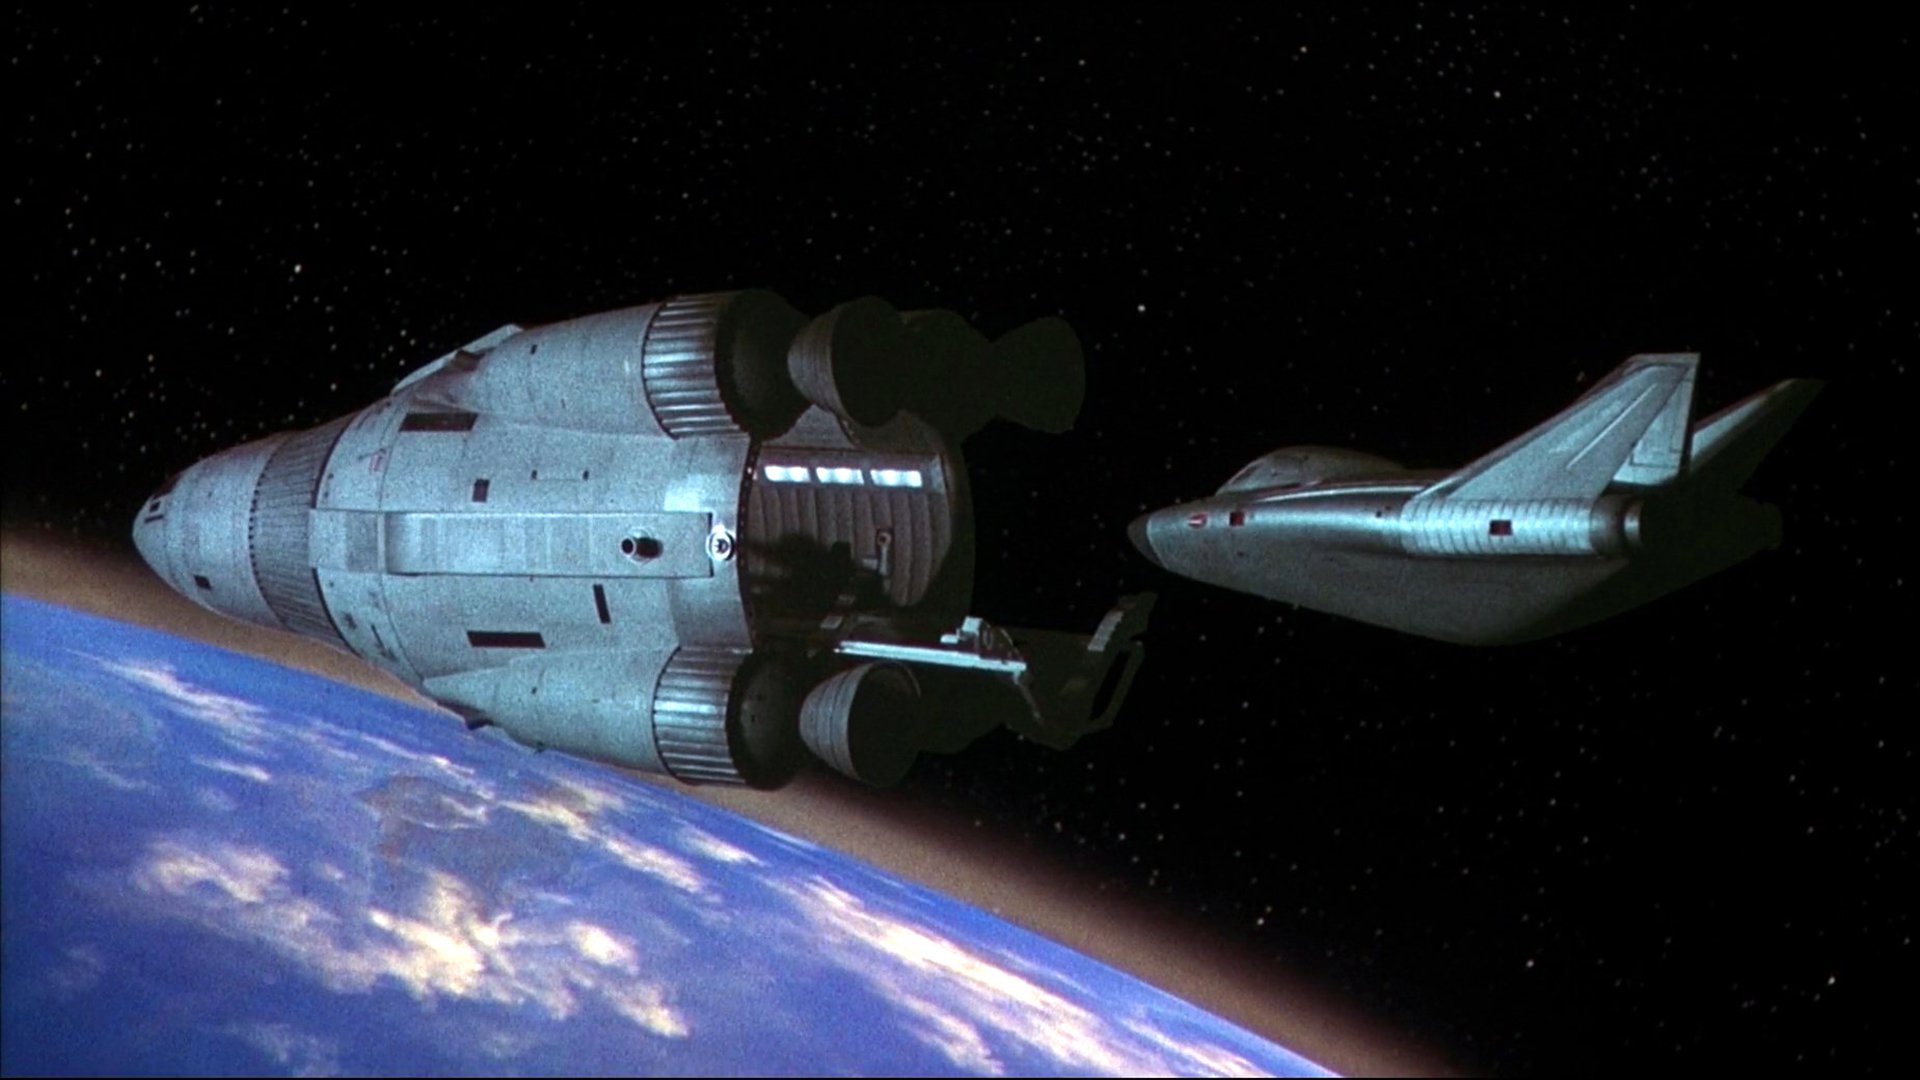 Space journey to the far side of the sun in Doppelganger (1969)